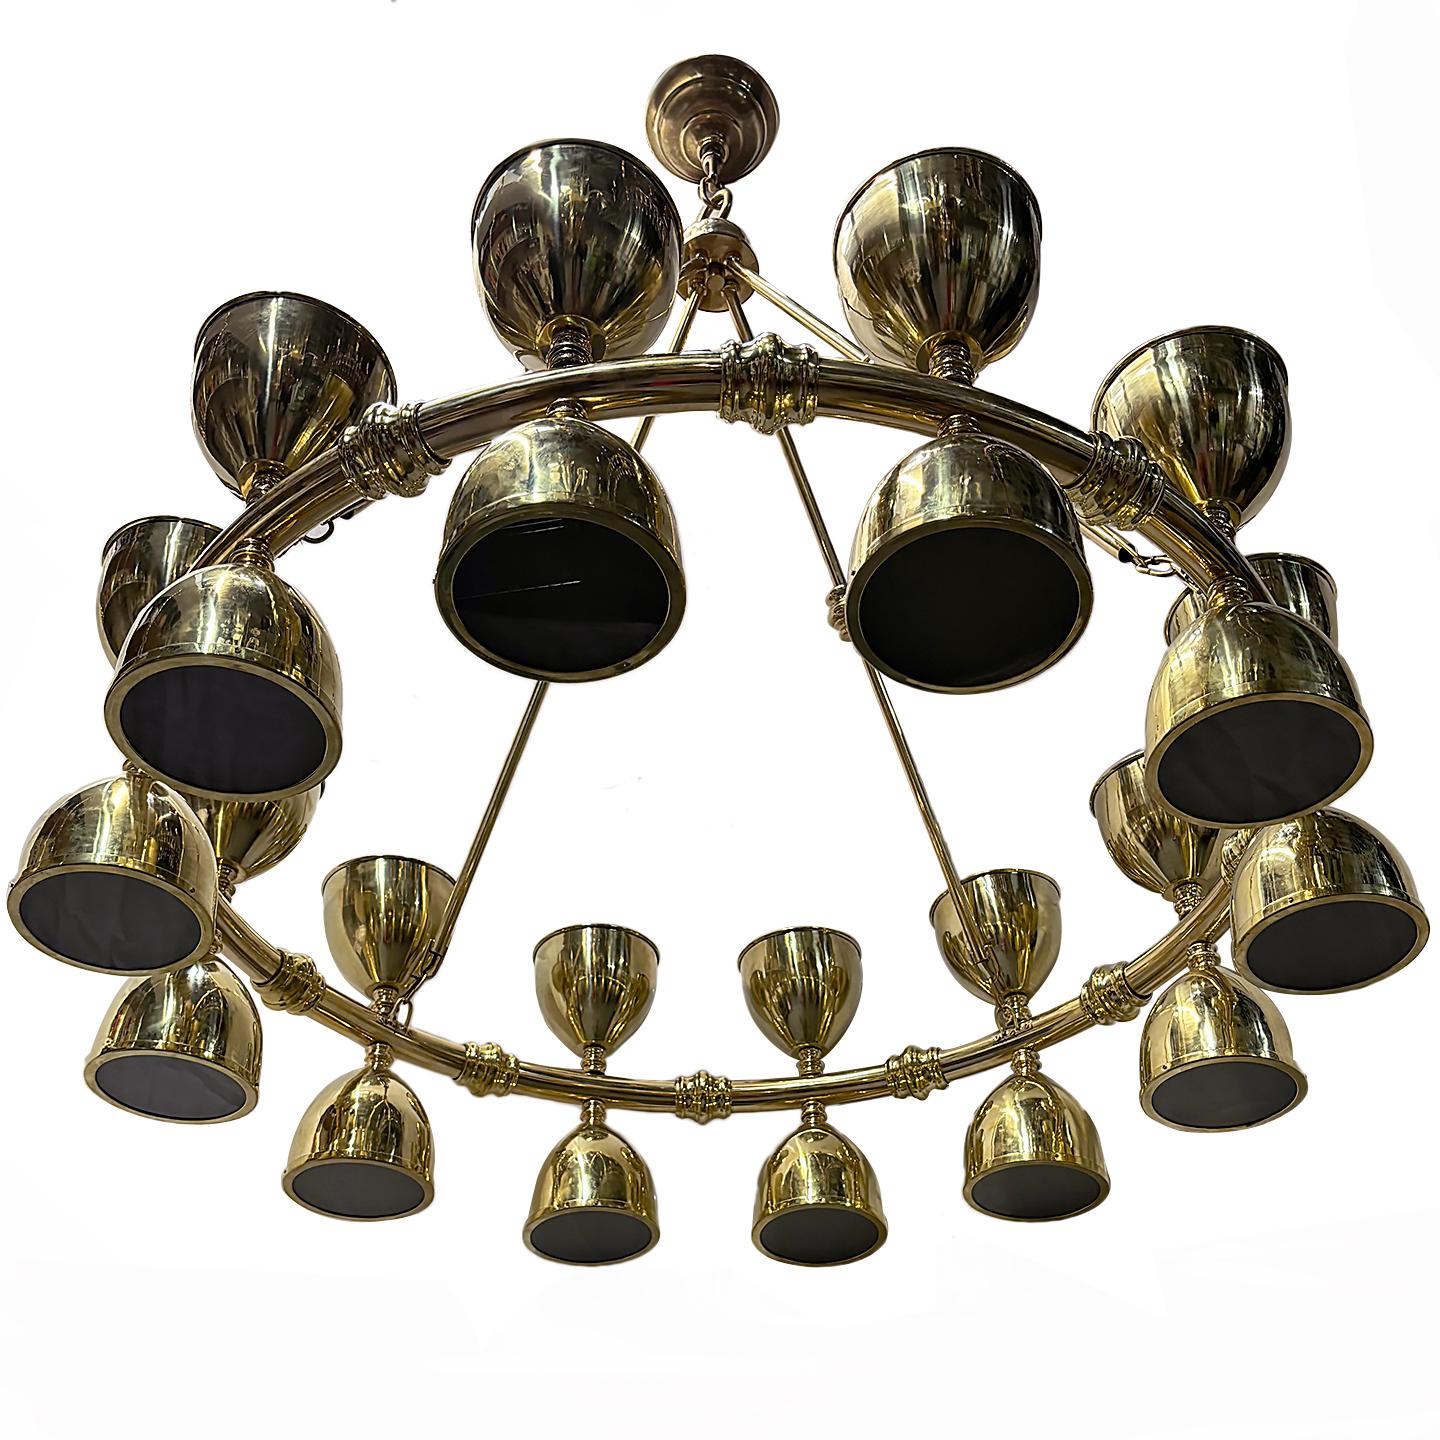 A circa 1960's Italian brass chandelier with 24 lights.Original patina.

Measurements:
Height: 52